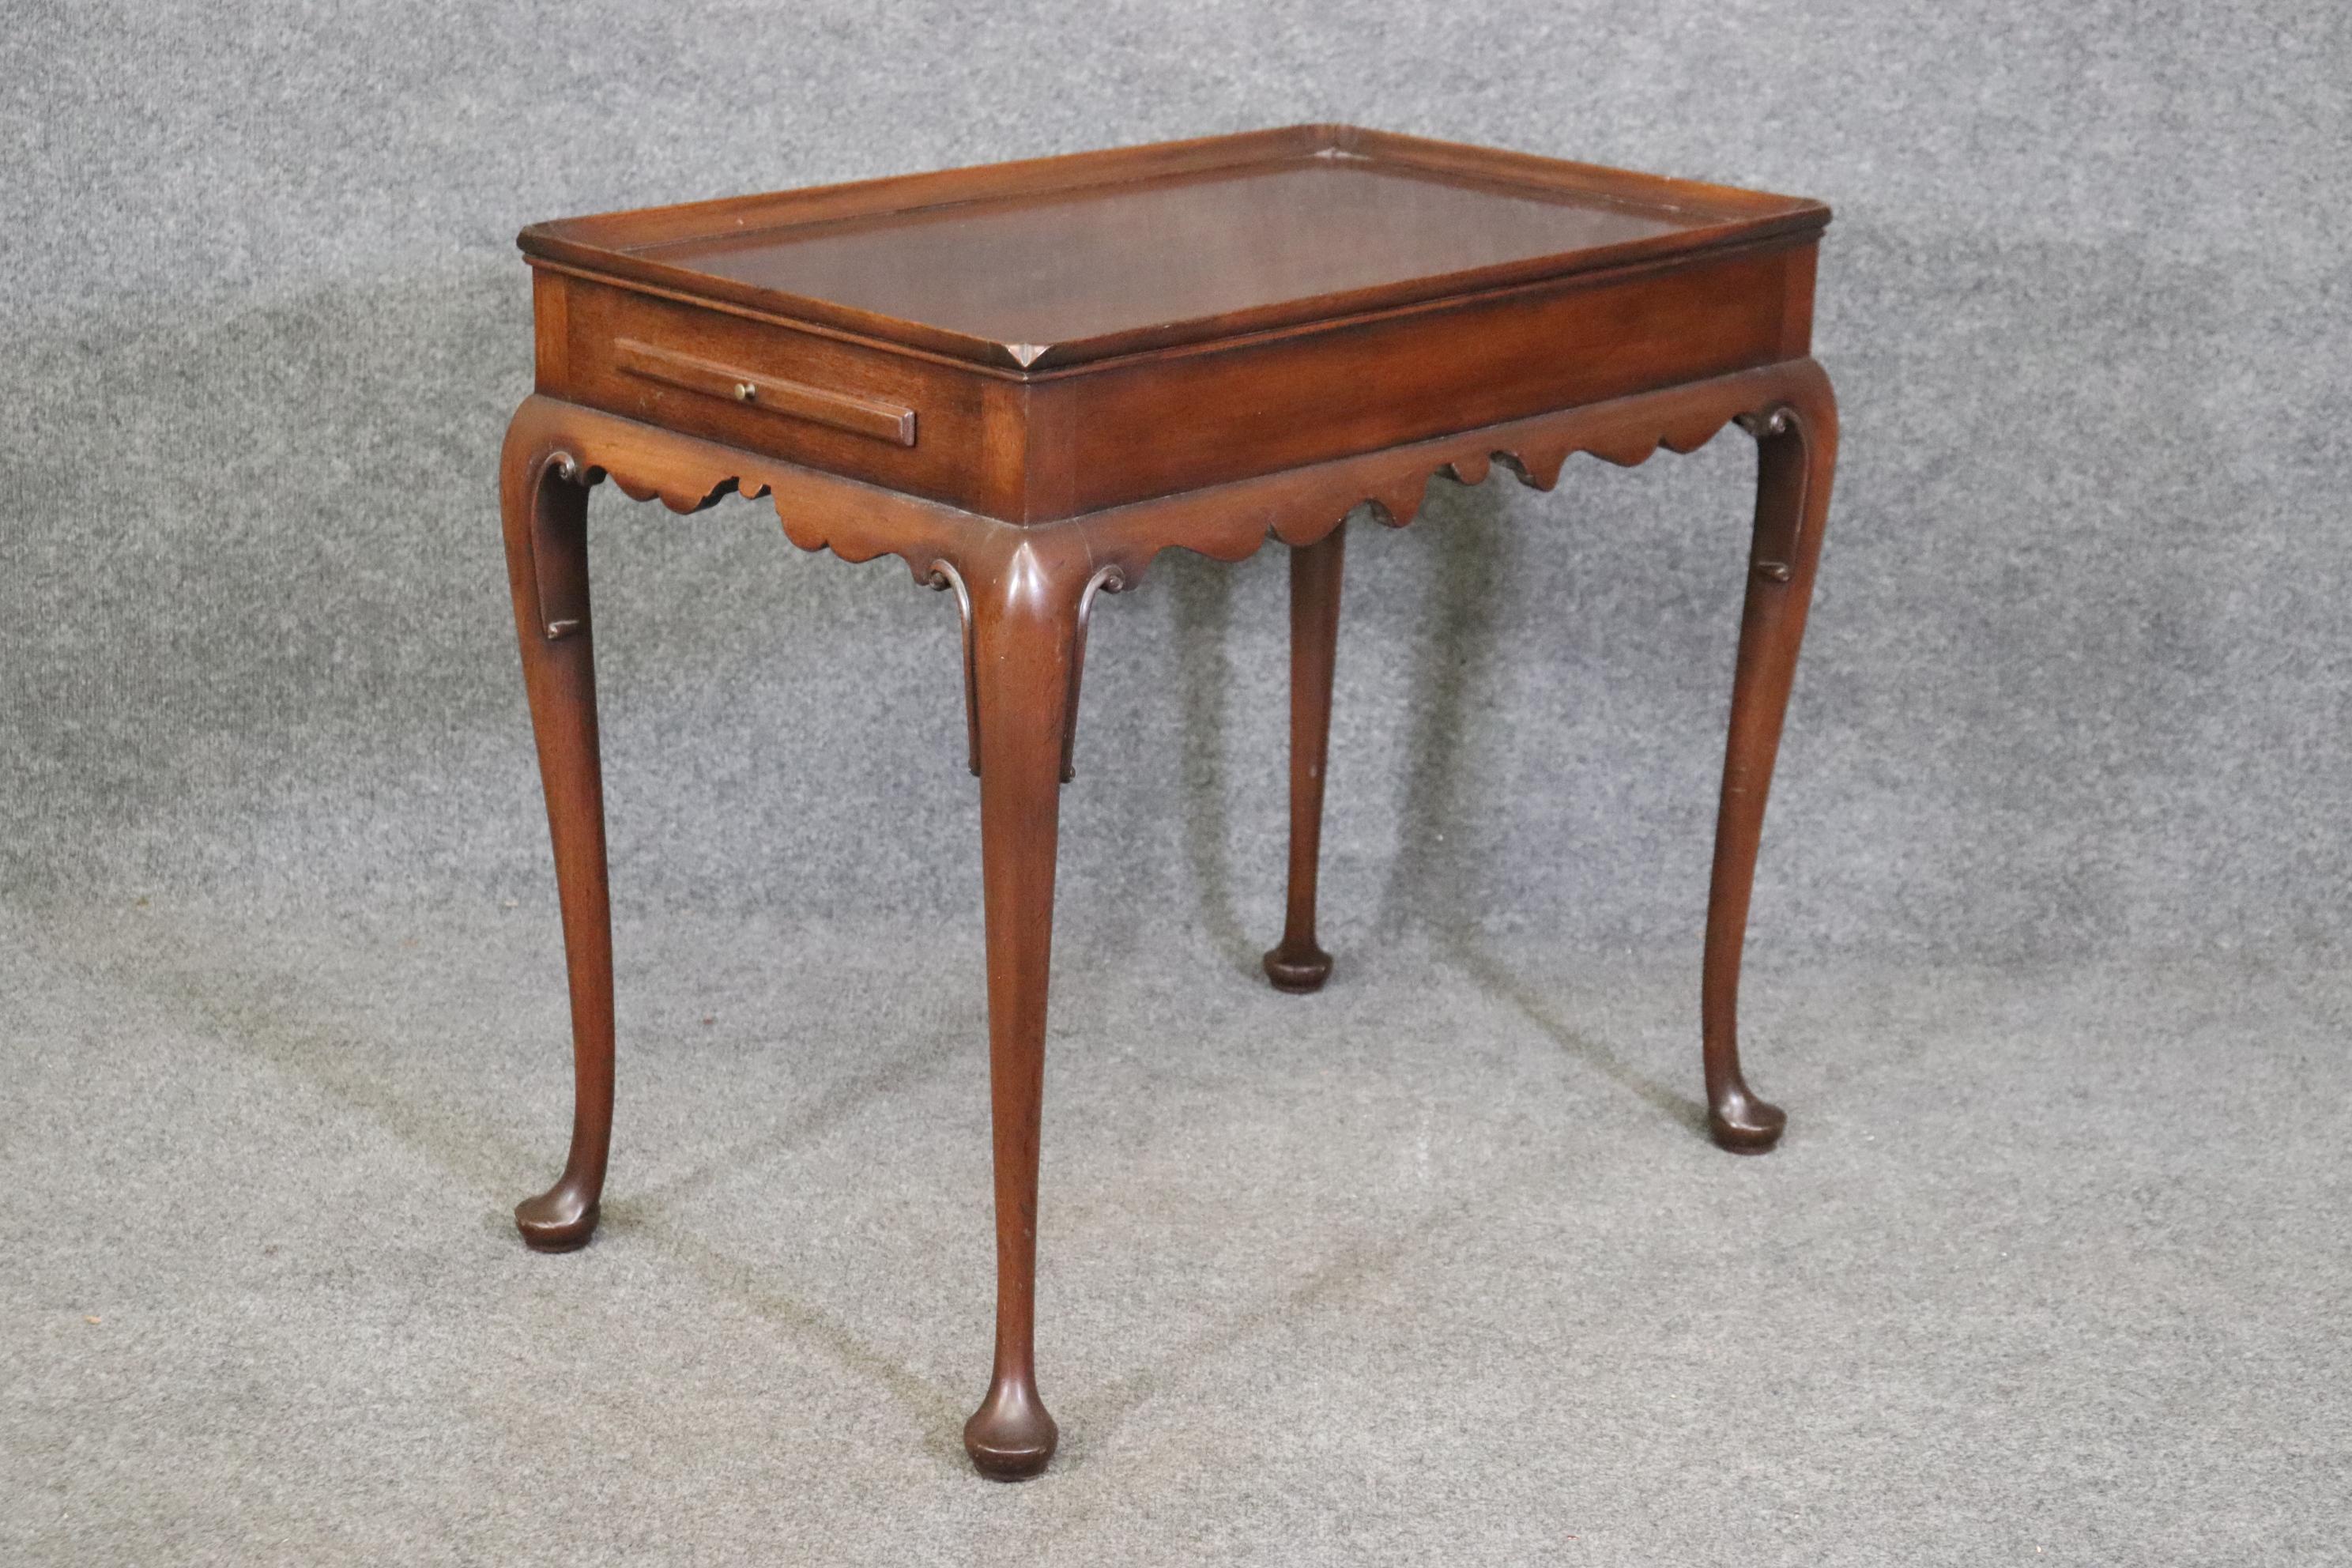 This is a Kittinger quality Colonial Williamsburg style tea table with pull out slides and in good condition. The table measures 26.5 tall x 30.25 wide  x 18.25 deep. The table dates to the 1960s-1970. 



We can help with shipping to the ground